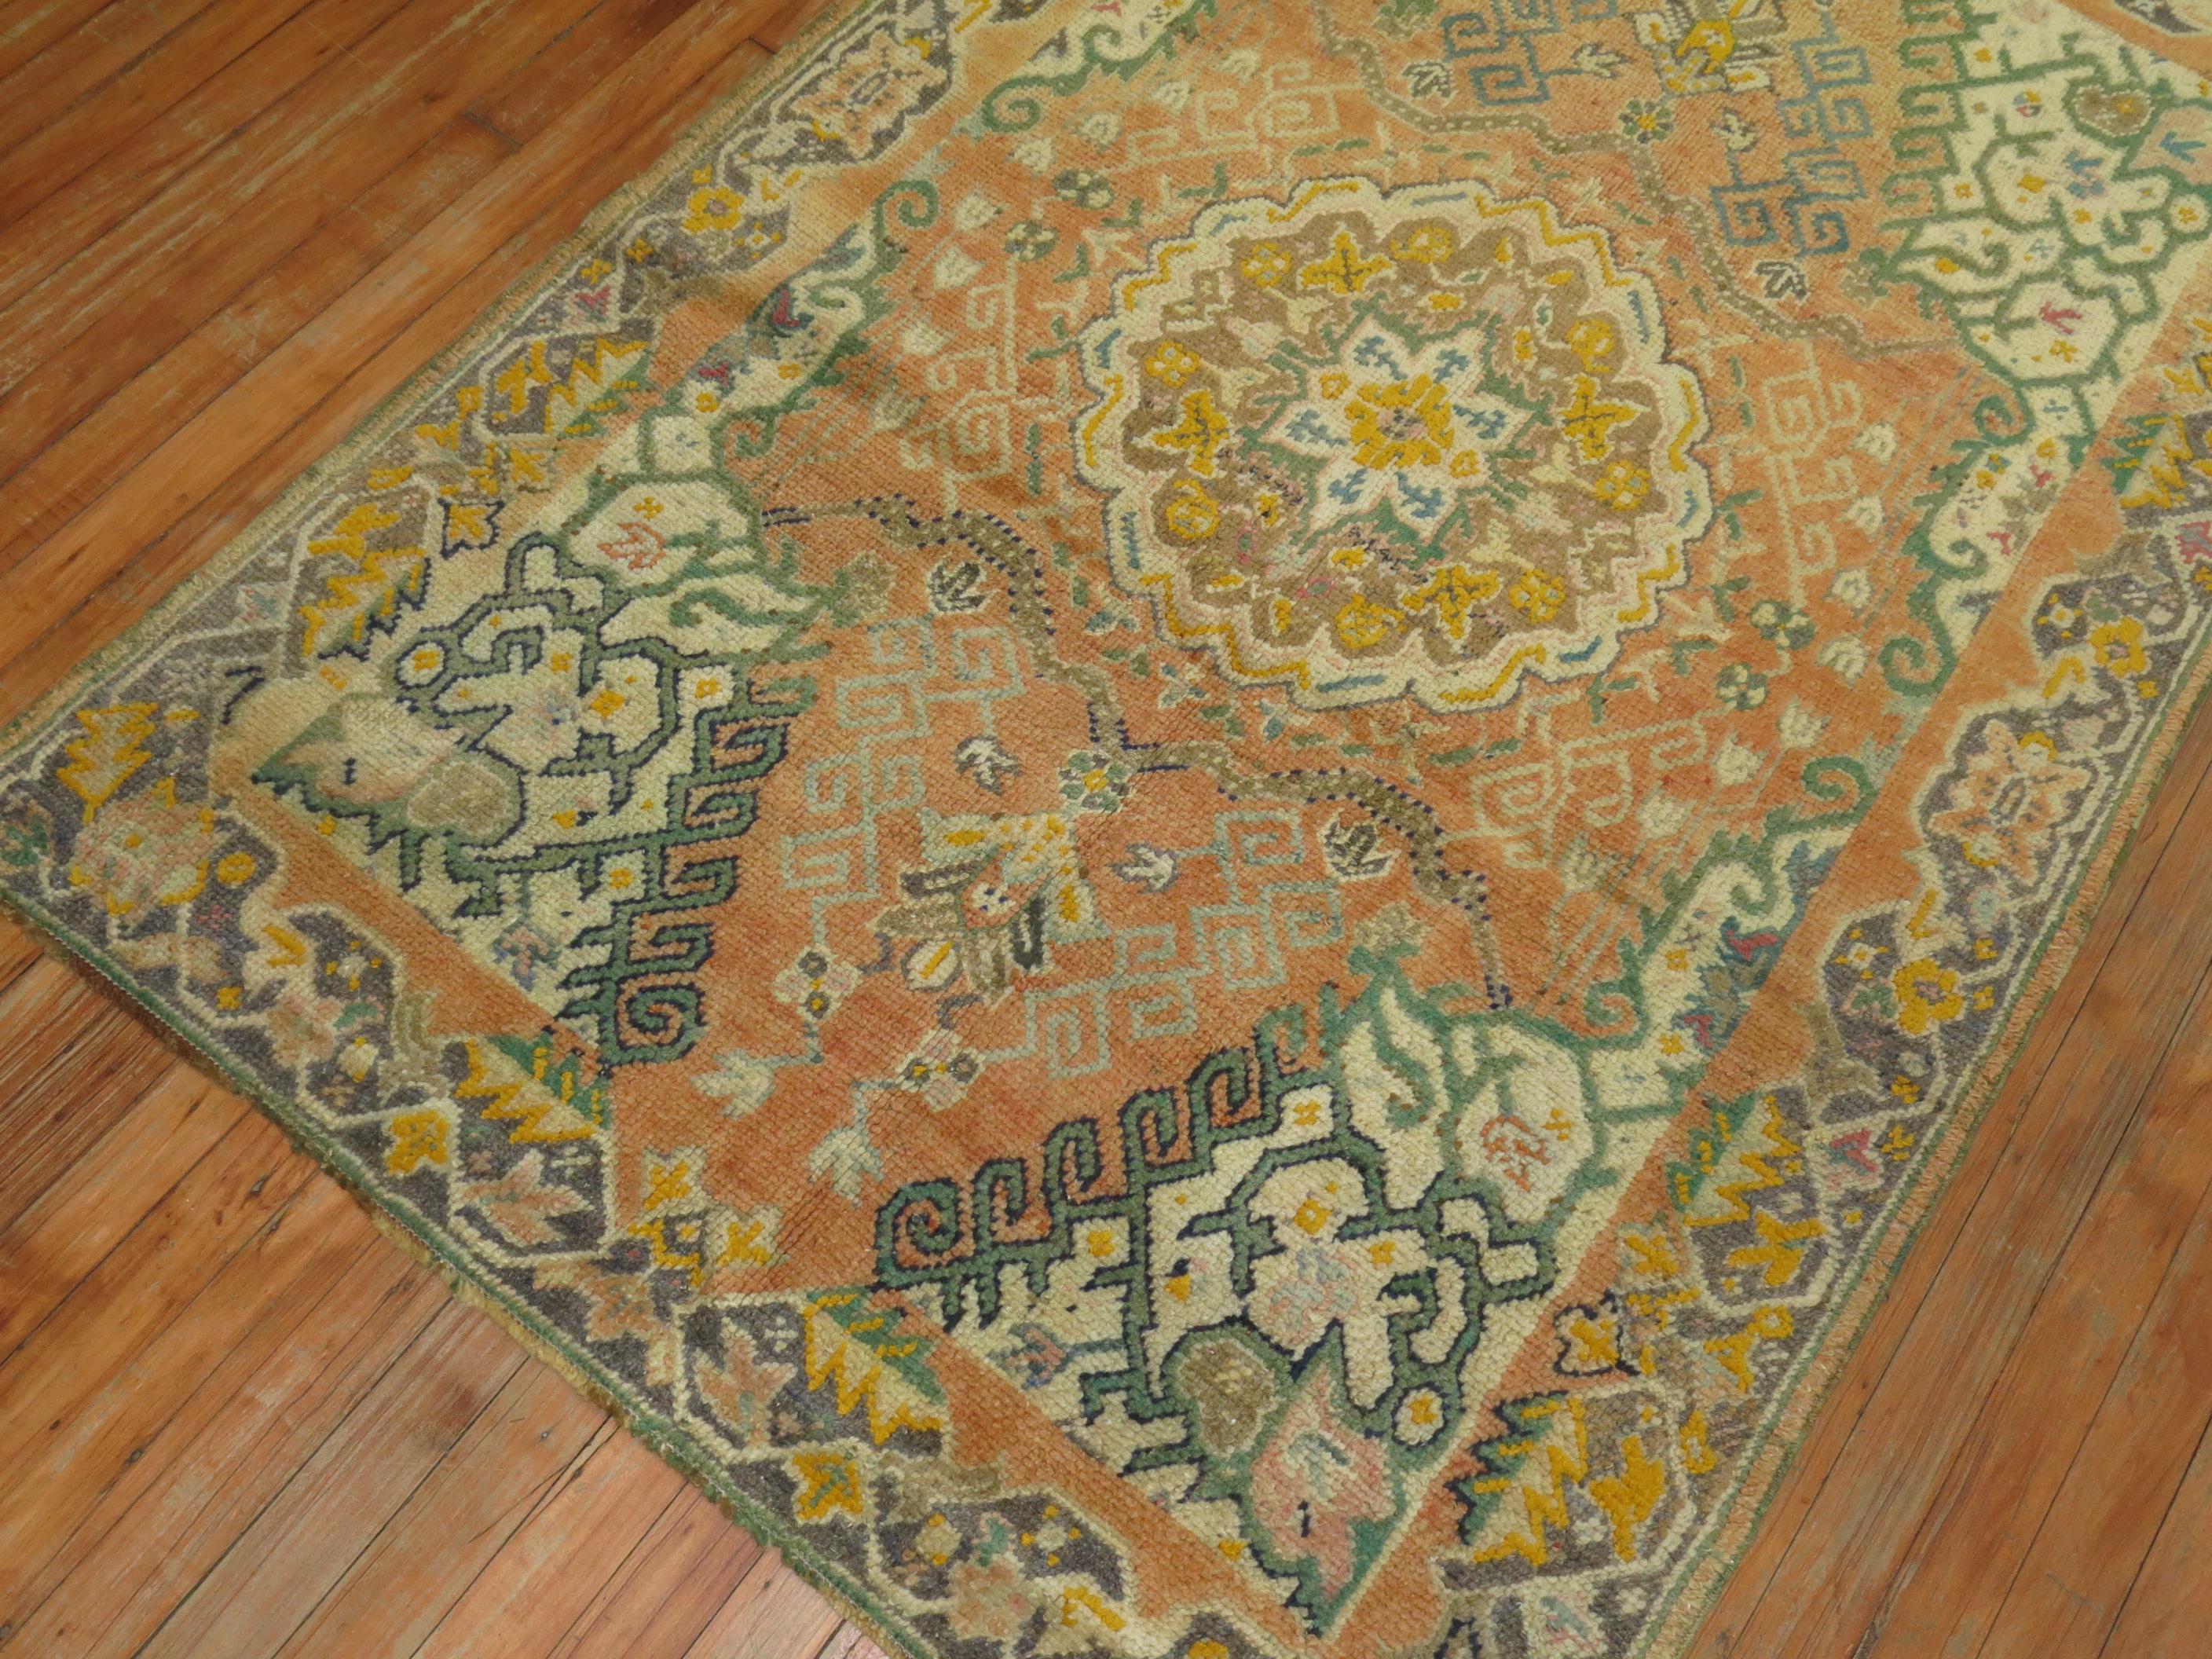 A early 20th century antique Turkish Oushak rug in predominant orange accents.